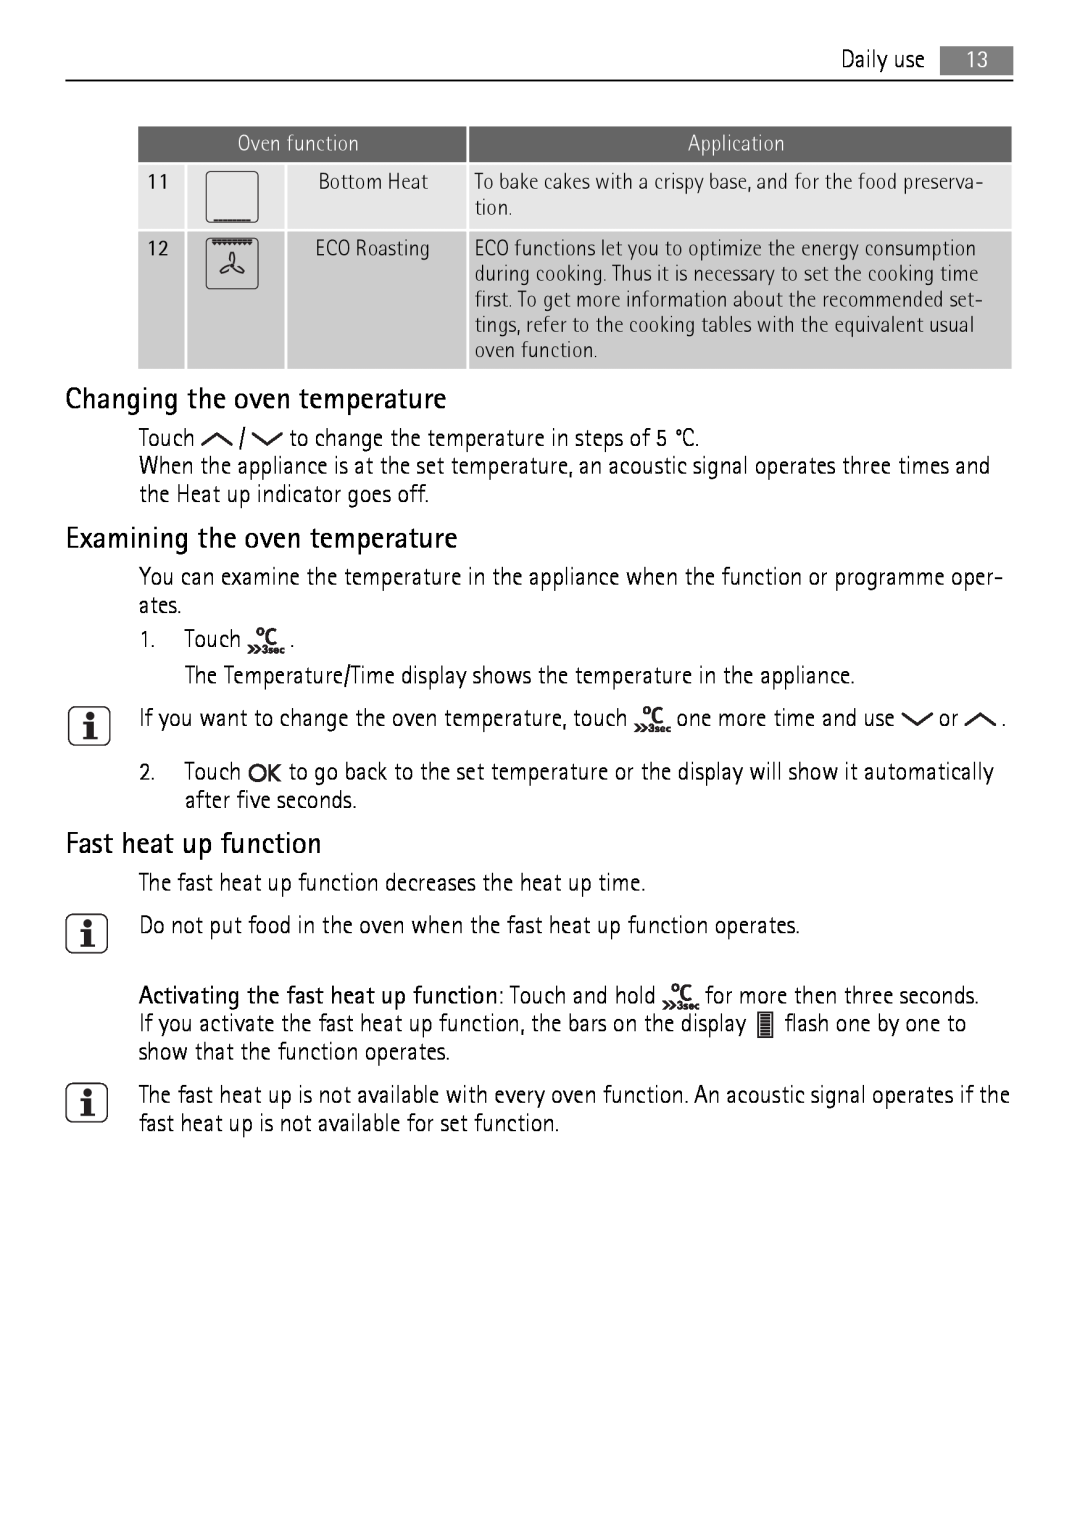 AEG BE7314401 user manual Changing the oven temperature, Examining the oven temperature, Fast heat up function 